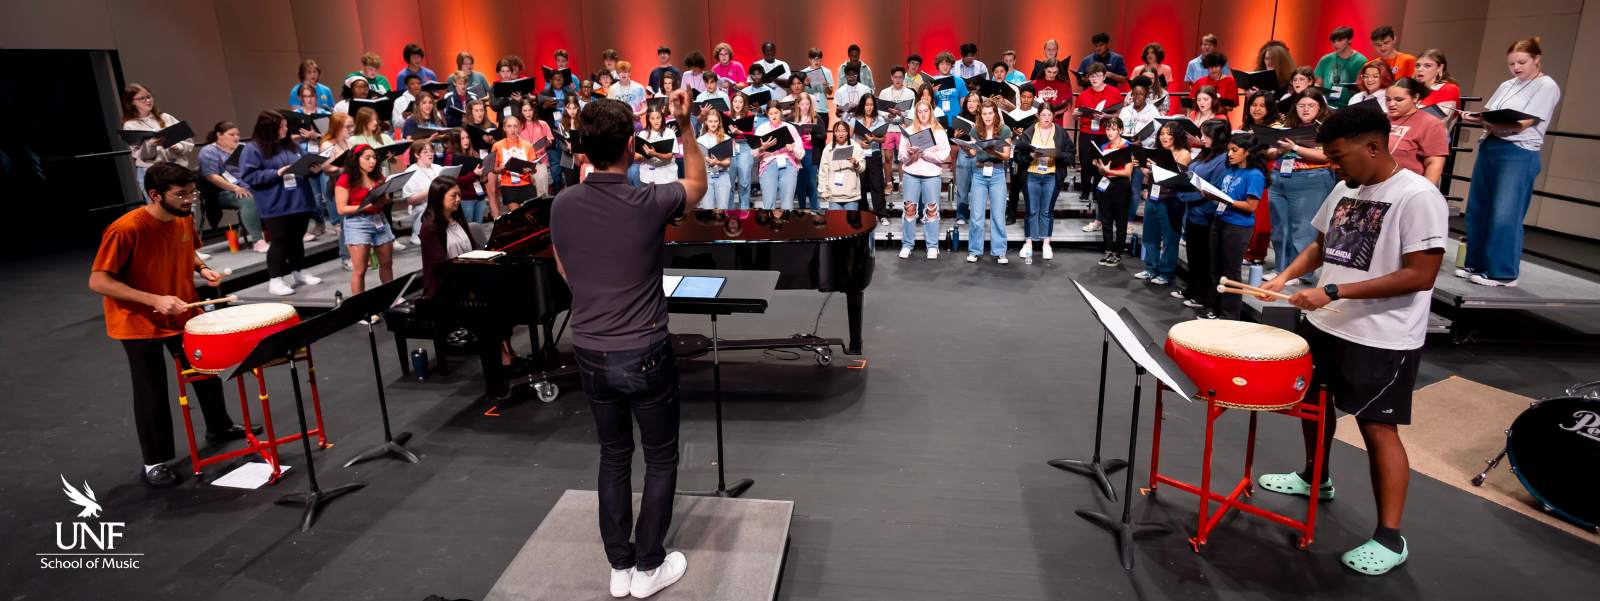 Conductor leading youth choir on stage